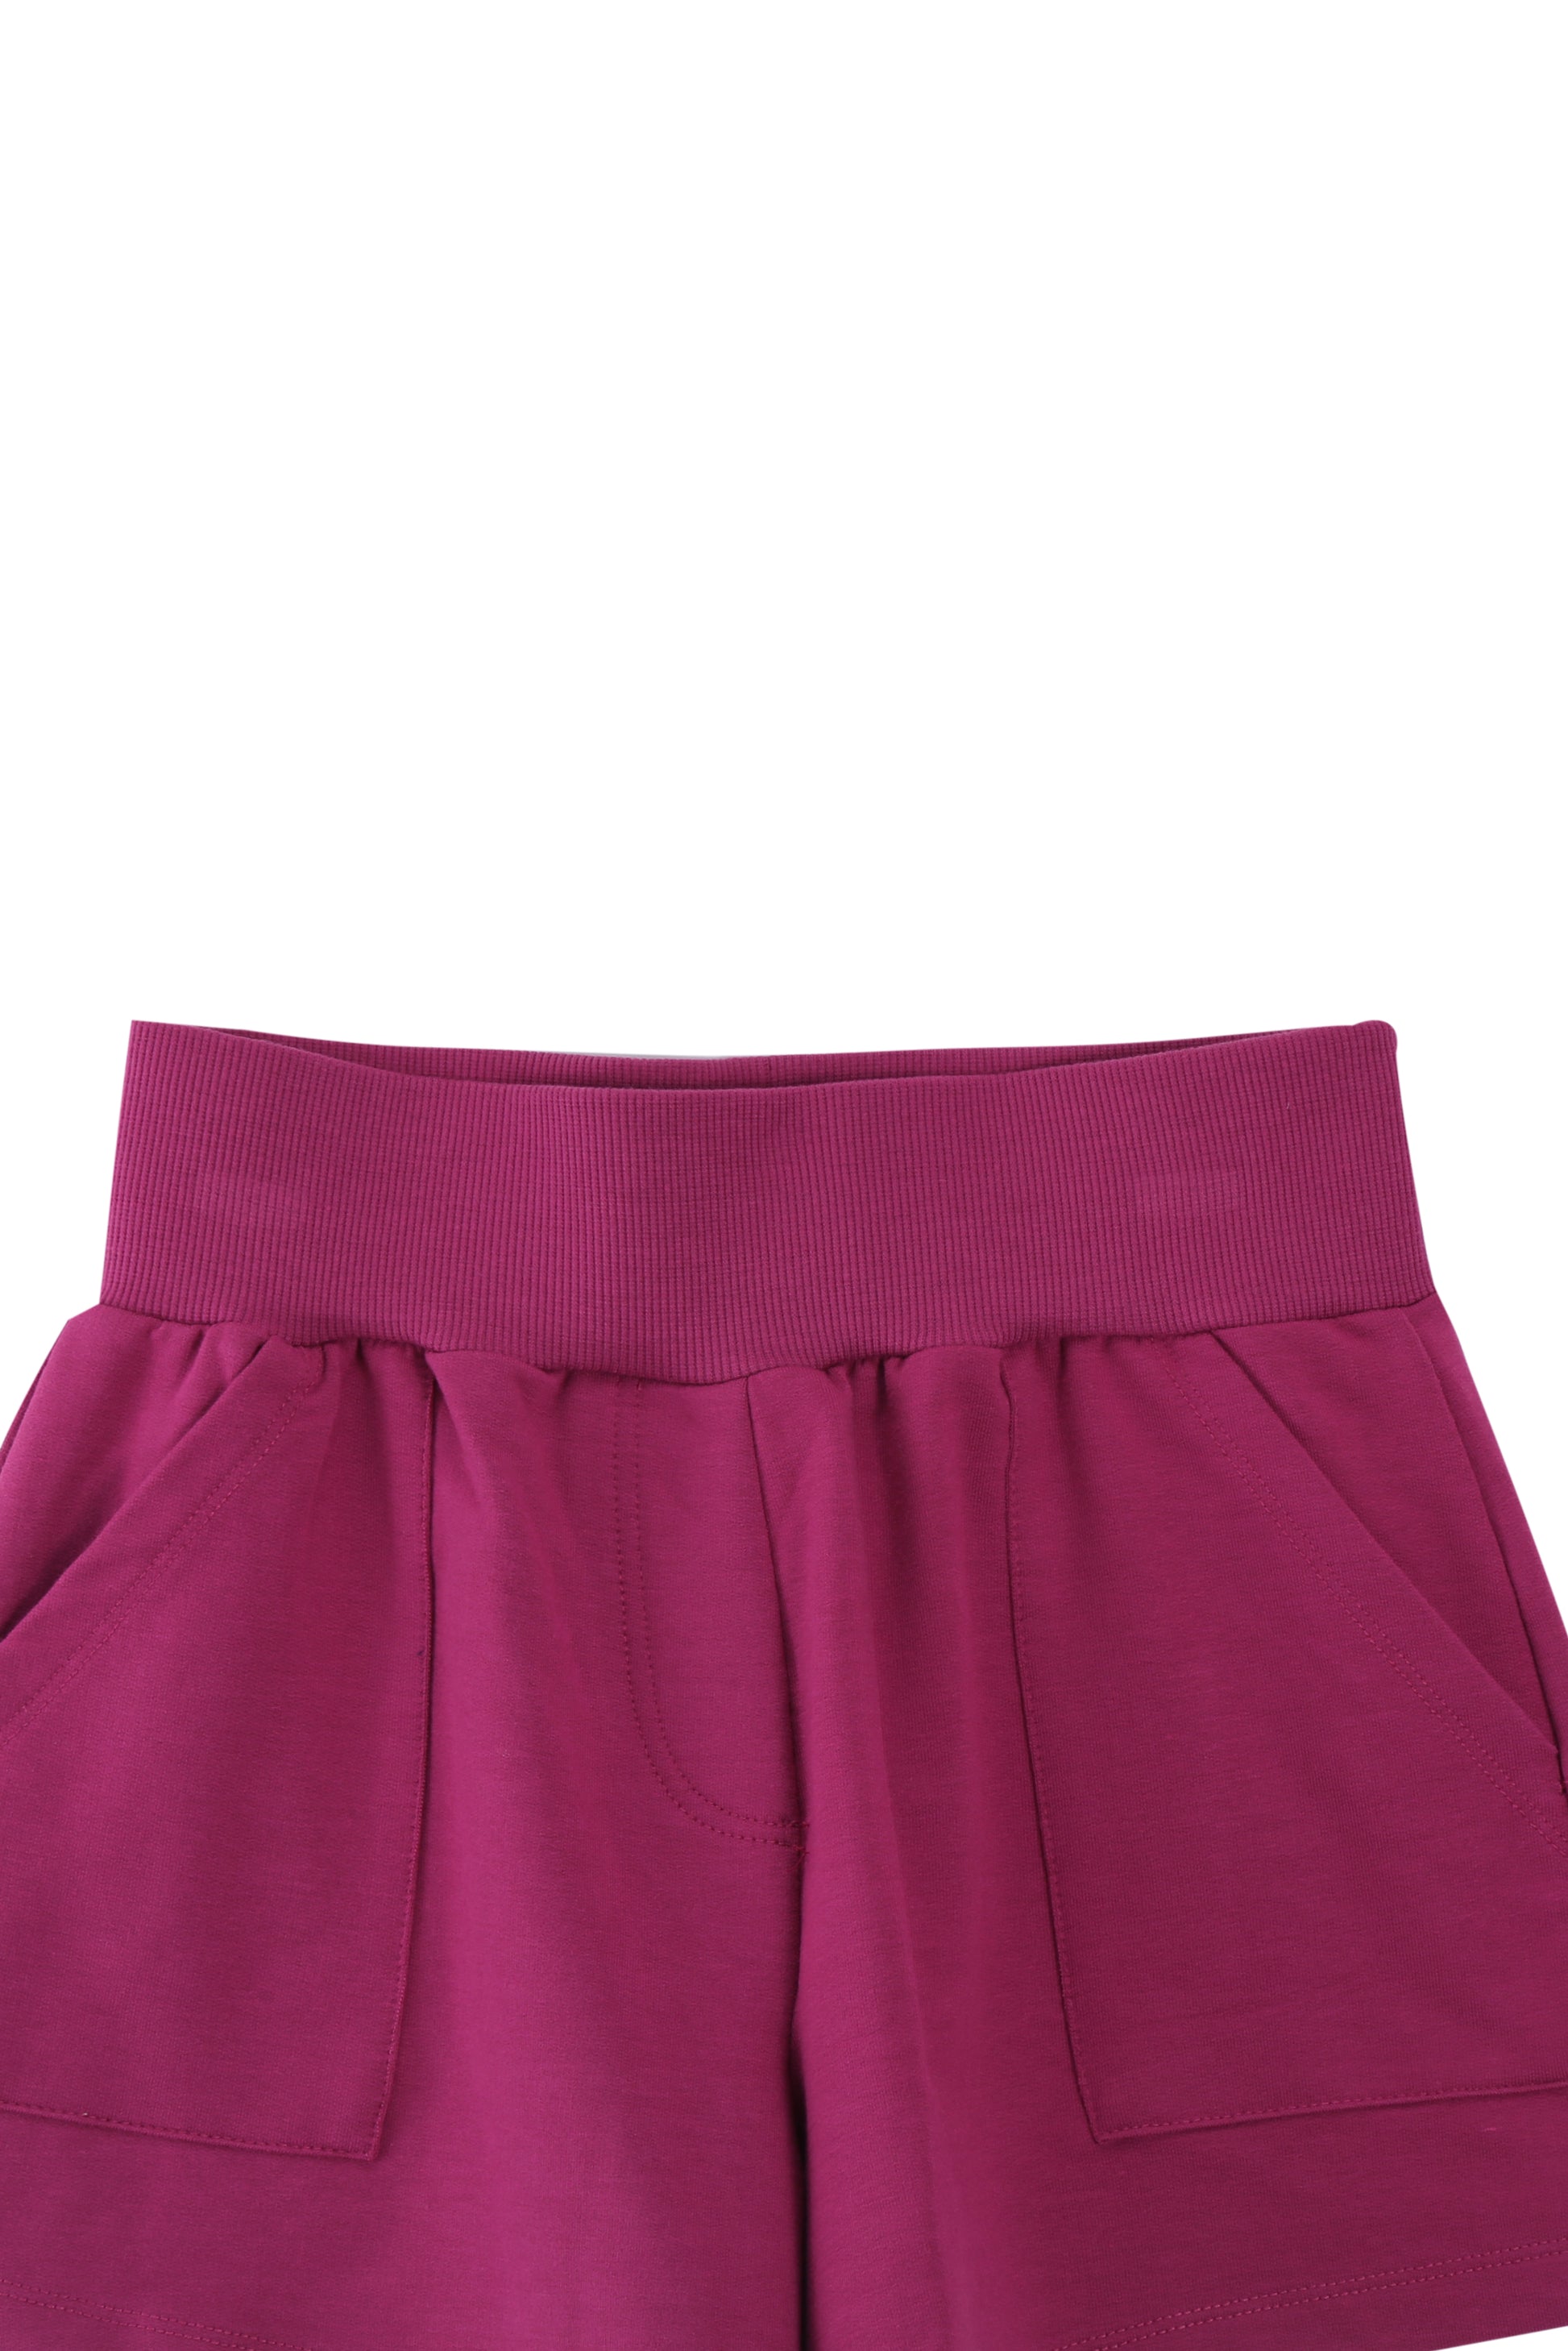 FLAT LAY OF DEEP MAGENTA FRENCH TERRY SWEAT SHORTS 